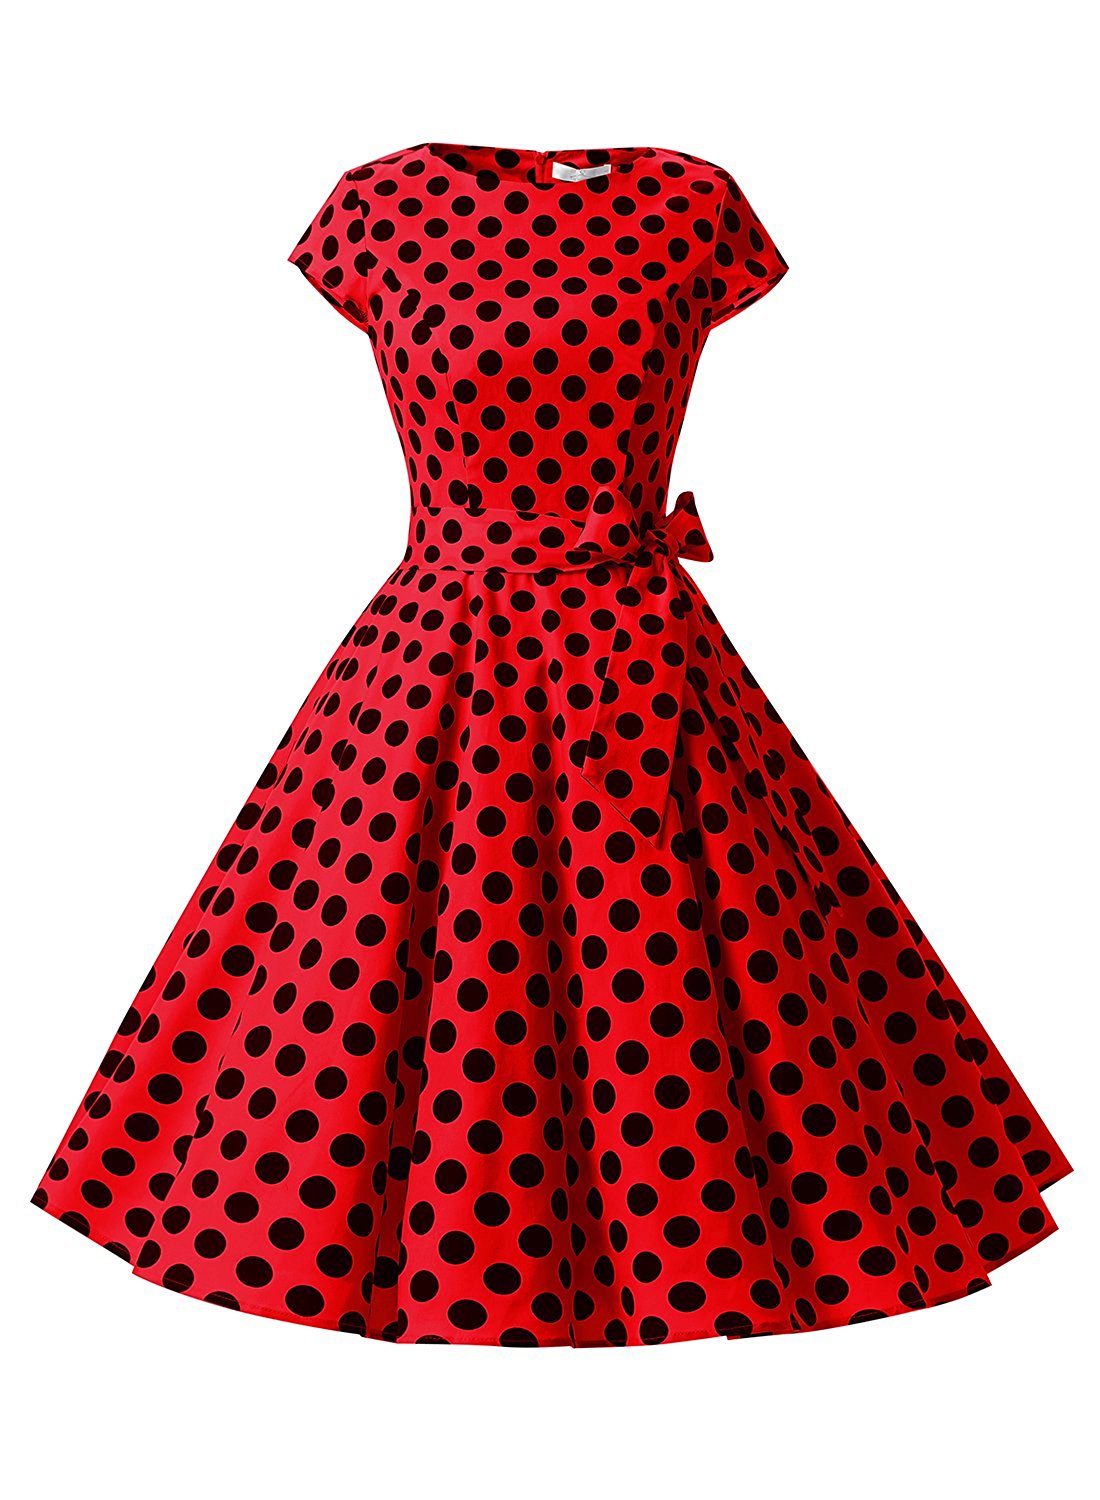 50s Fashion Rockabilly Style Red Polka Dots Vintage Dress With